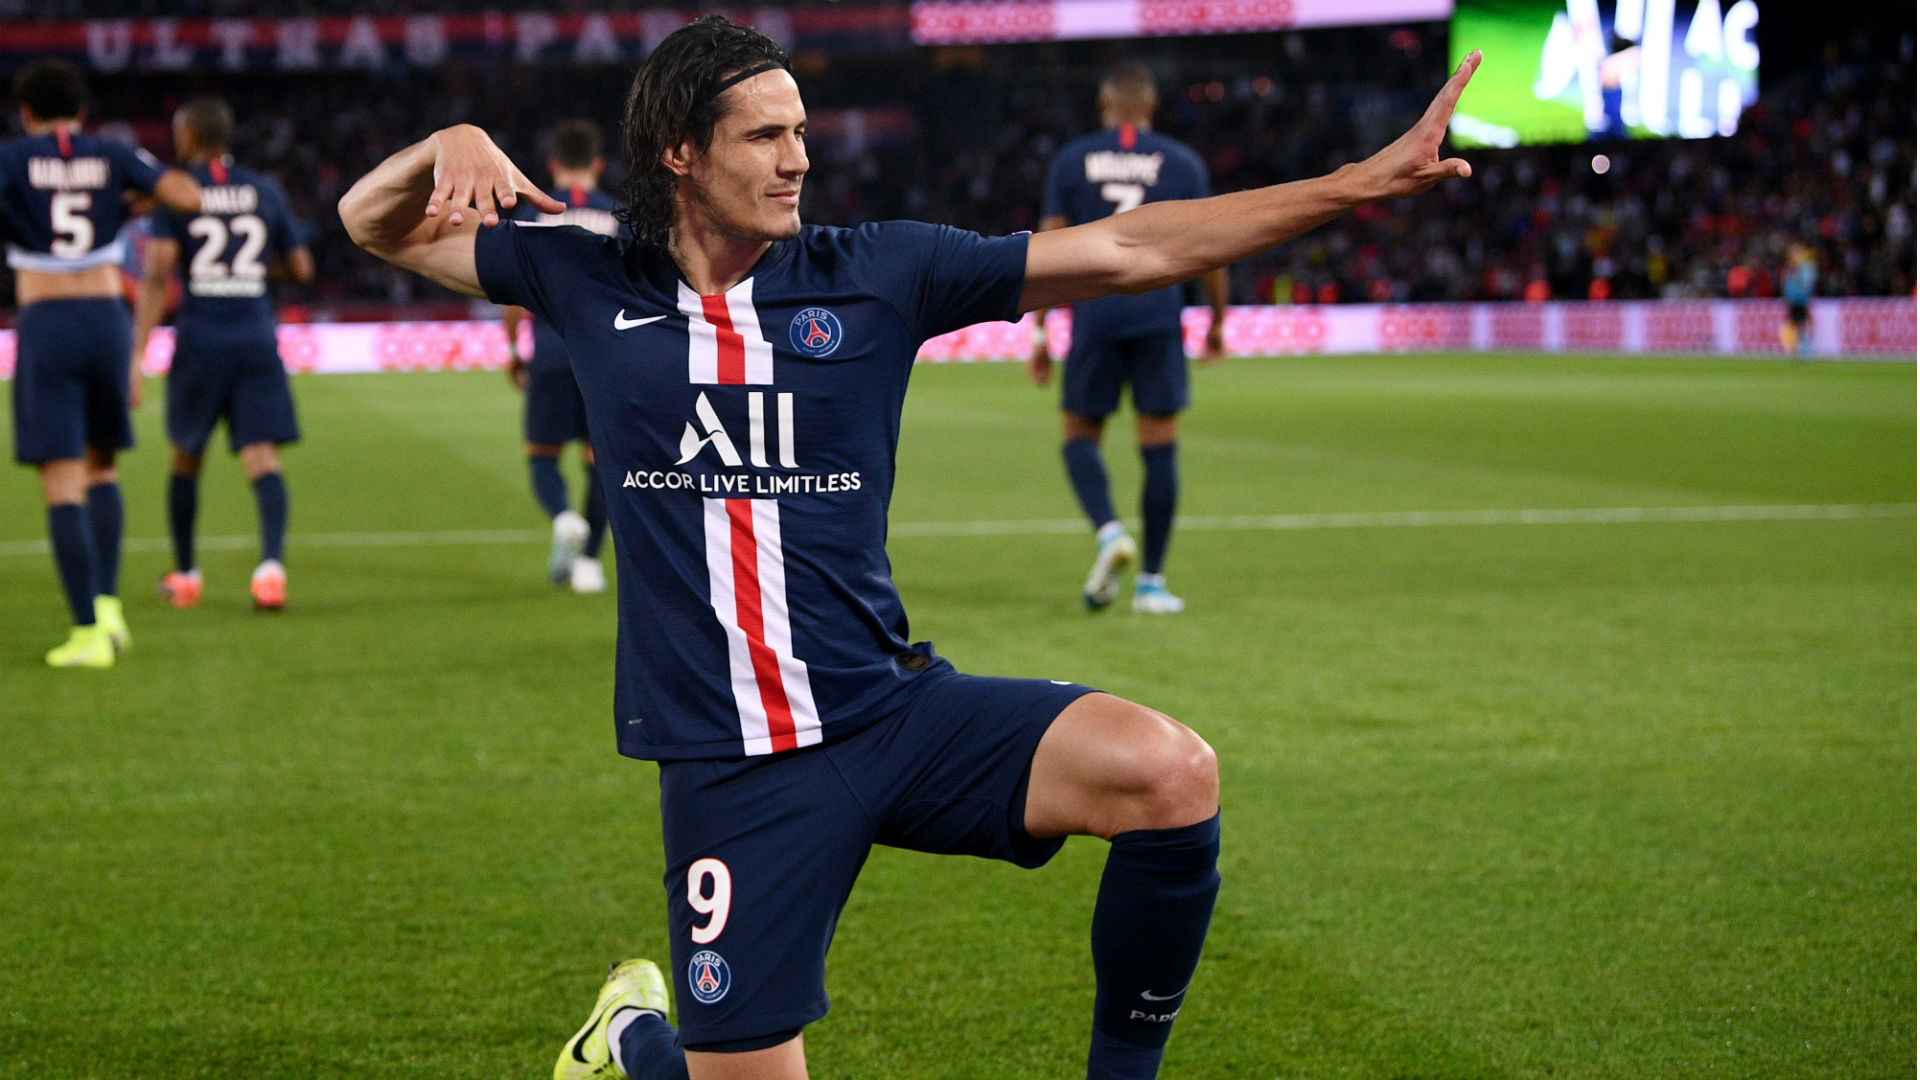 PSG striker Cavani committed to playing on in Europe